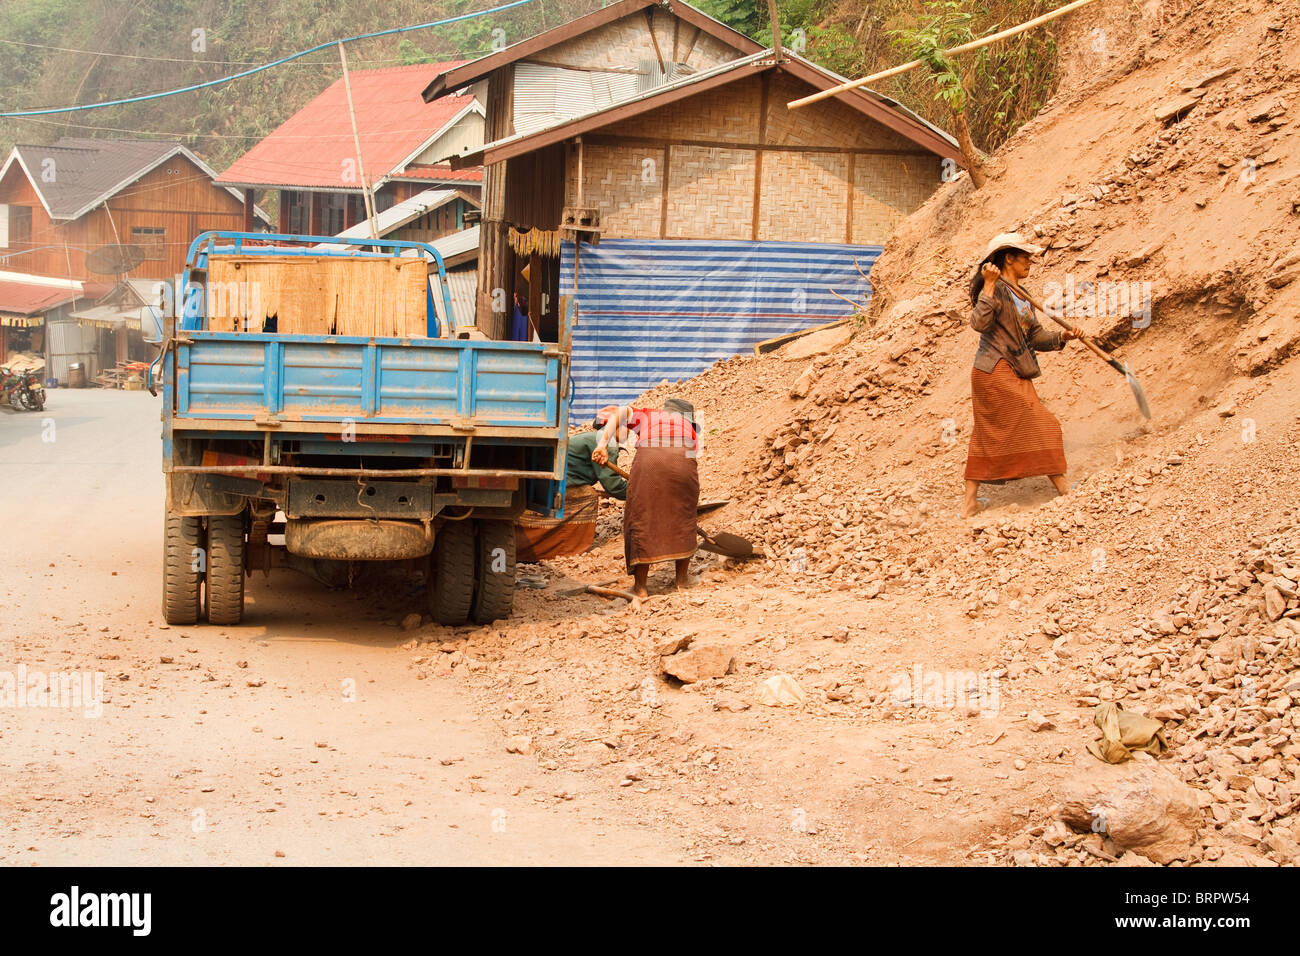 Two minority women shovel dirt into a truck at a construction site in Pak Beng, Laos Stock Photo